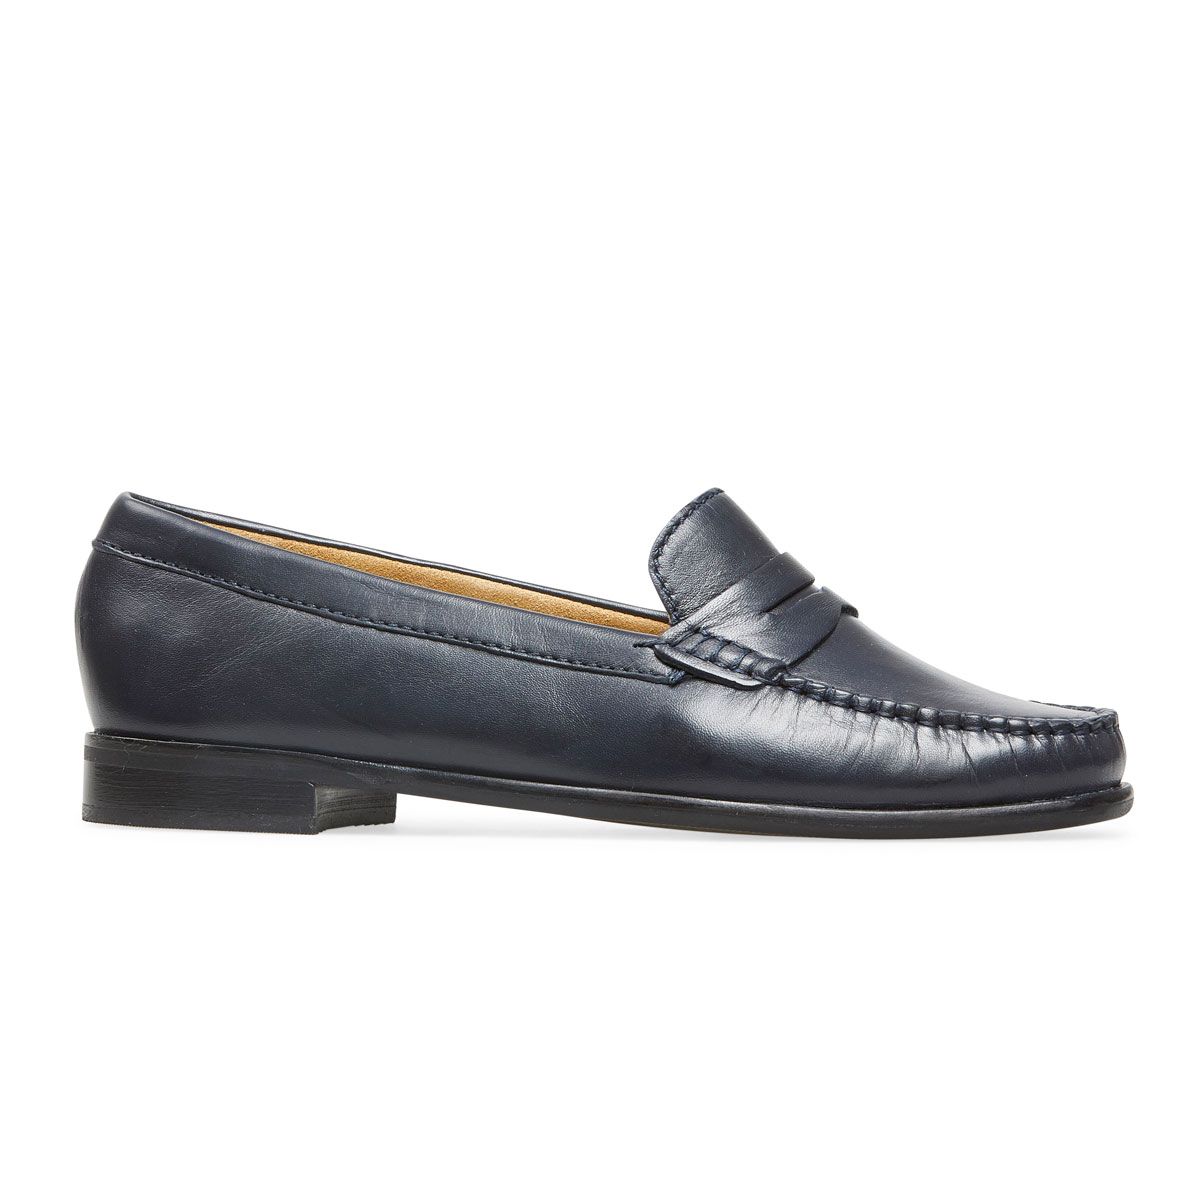 Van Dal Shoes - Hampden Loafers in Navy Leather